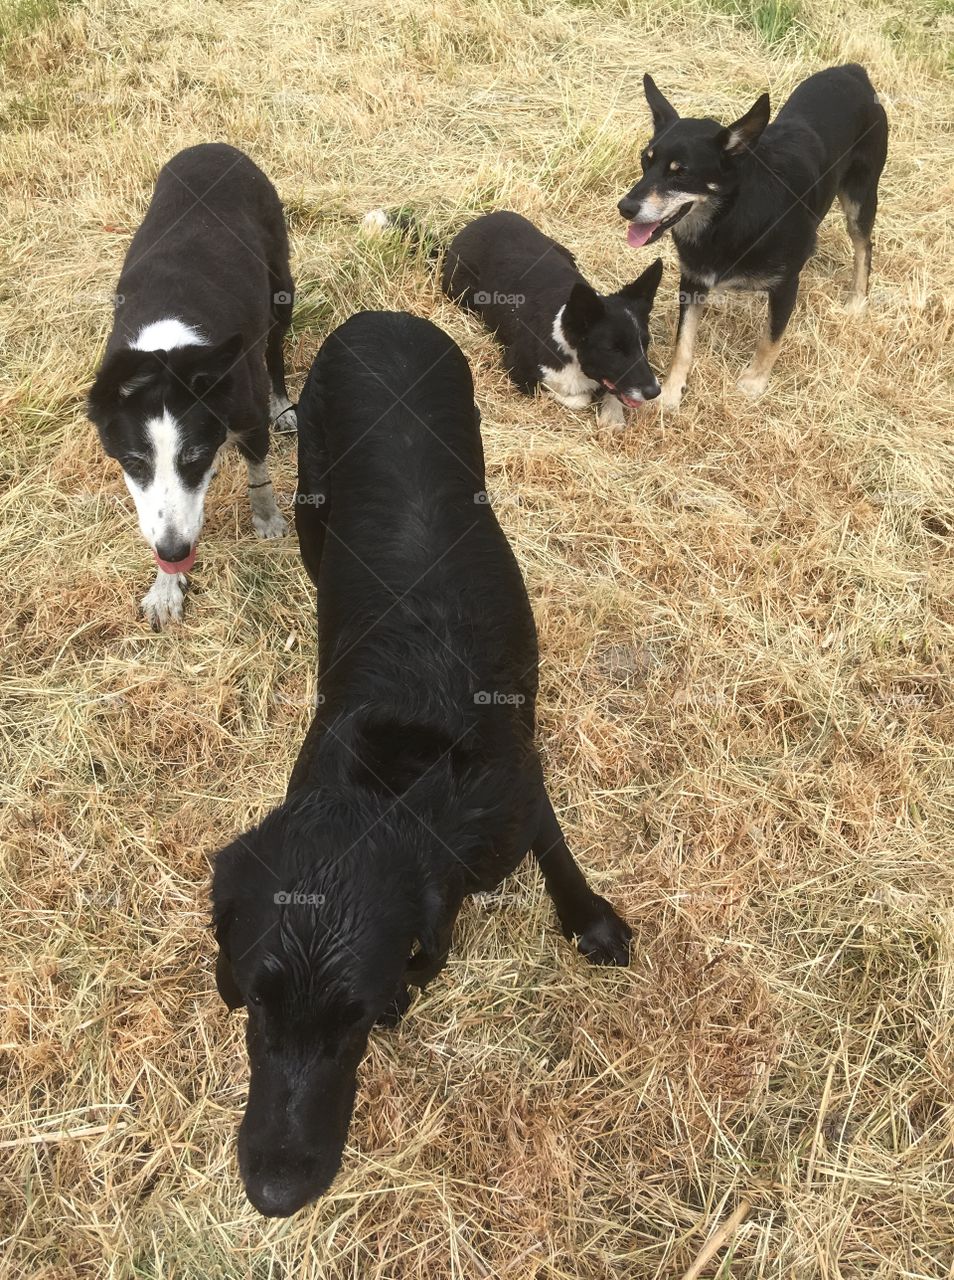 Follow my leader. Four gorgeous dogs . A lovely shot, all poised for action and back drop of dried grass pops them out